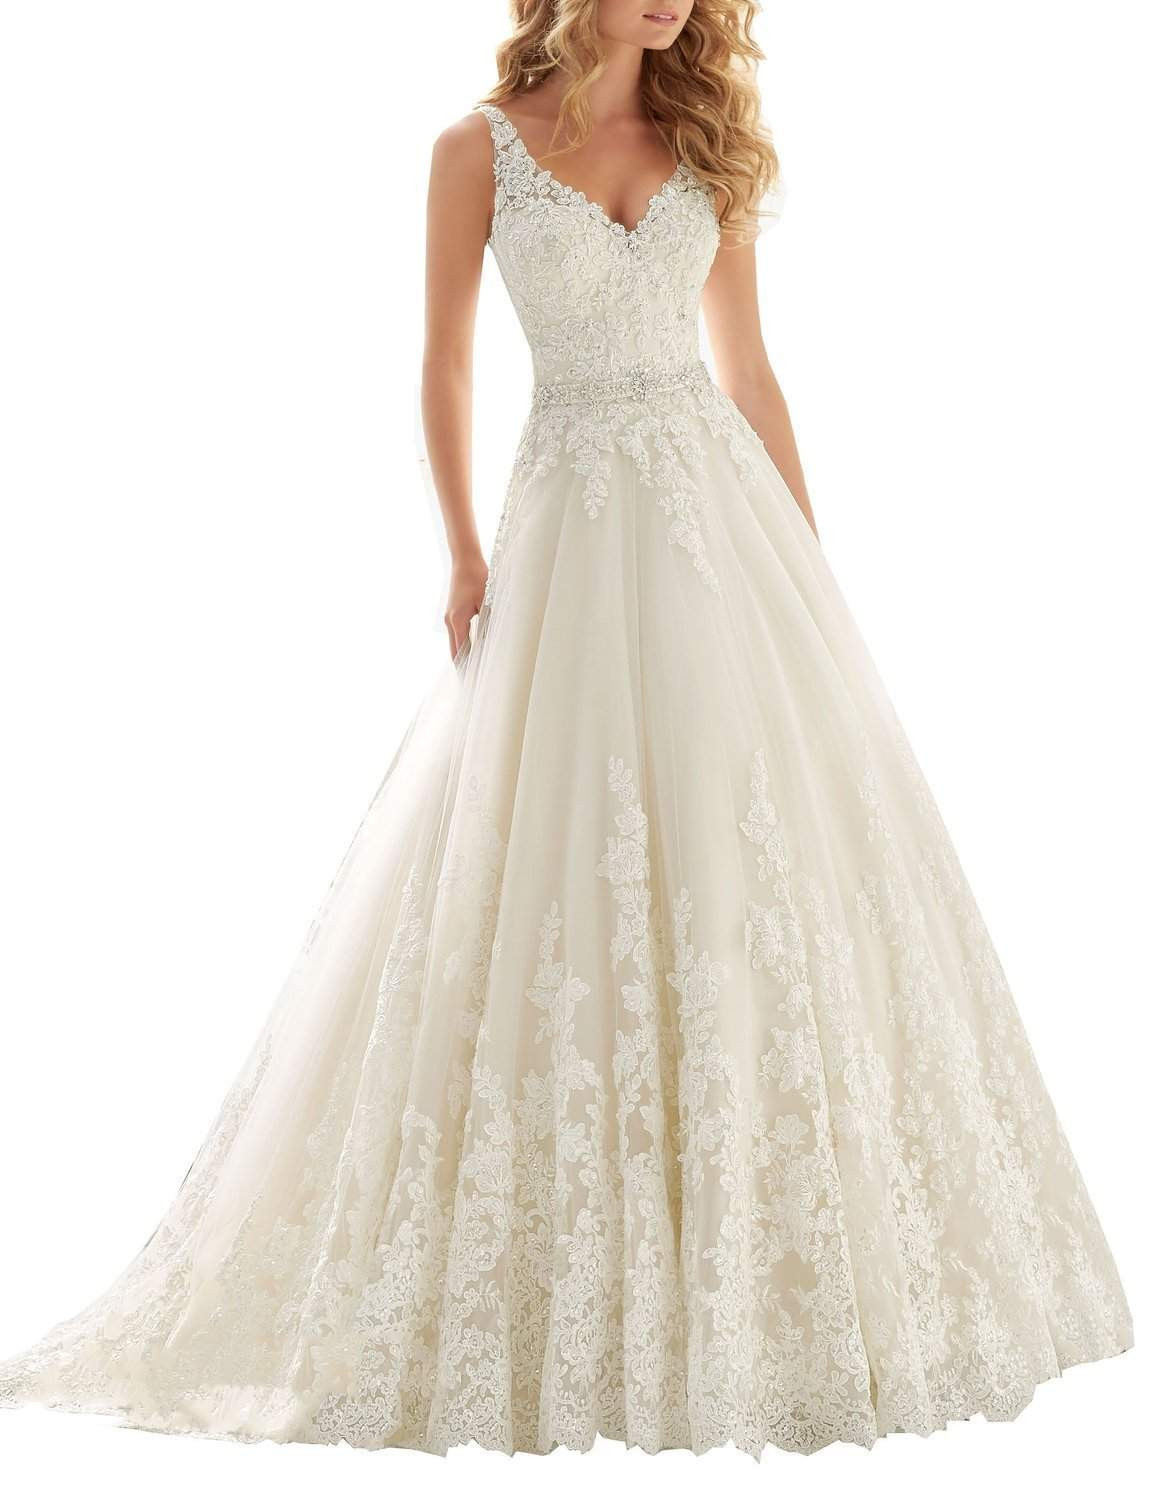 Inexpensive Wedding Gowns
 Top 50 Best Cheap Wedding Dresses pare Buy & Save